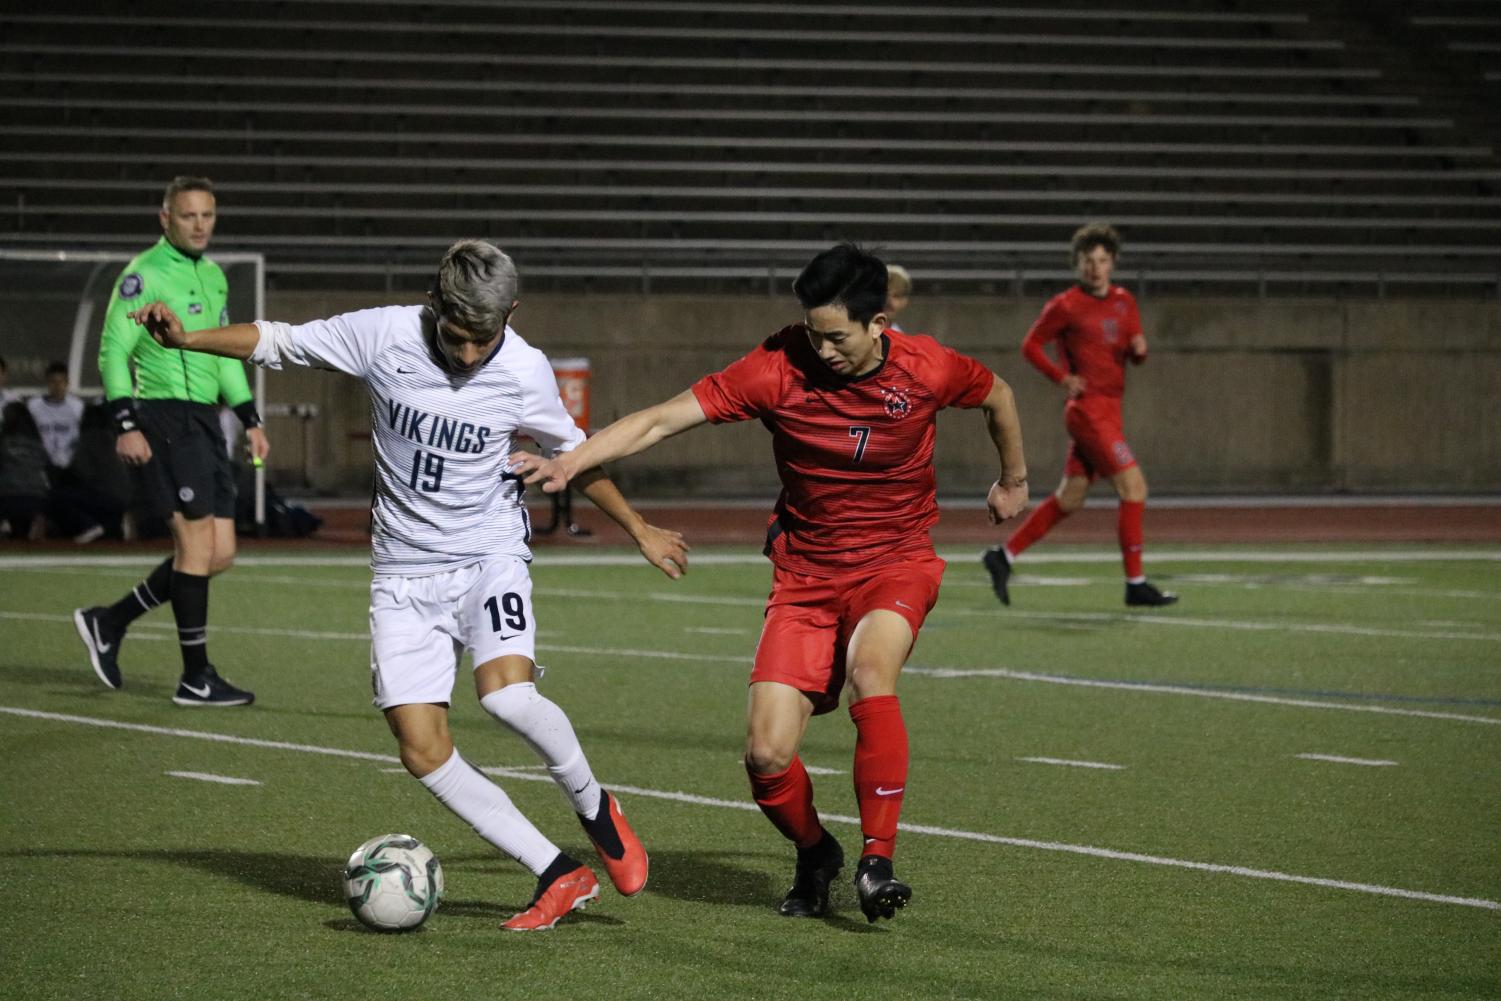 Coppell Student Media | Student athletes balancing academics with sports